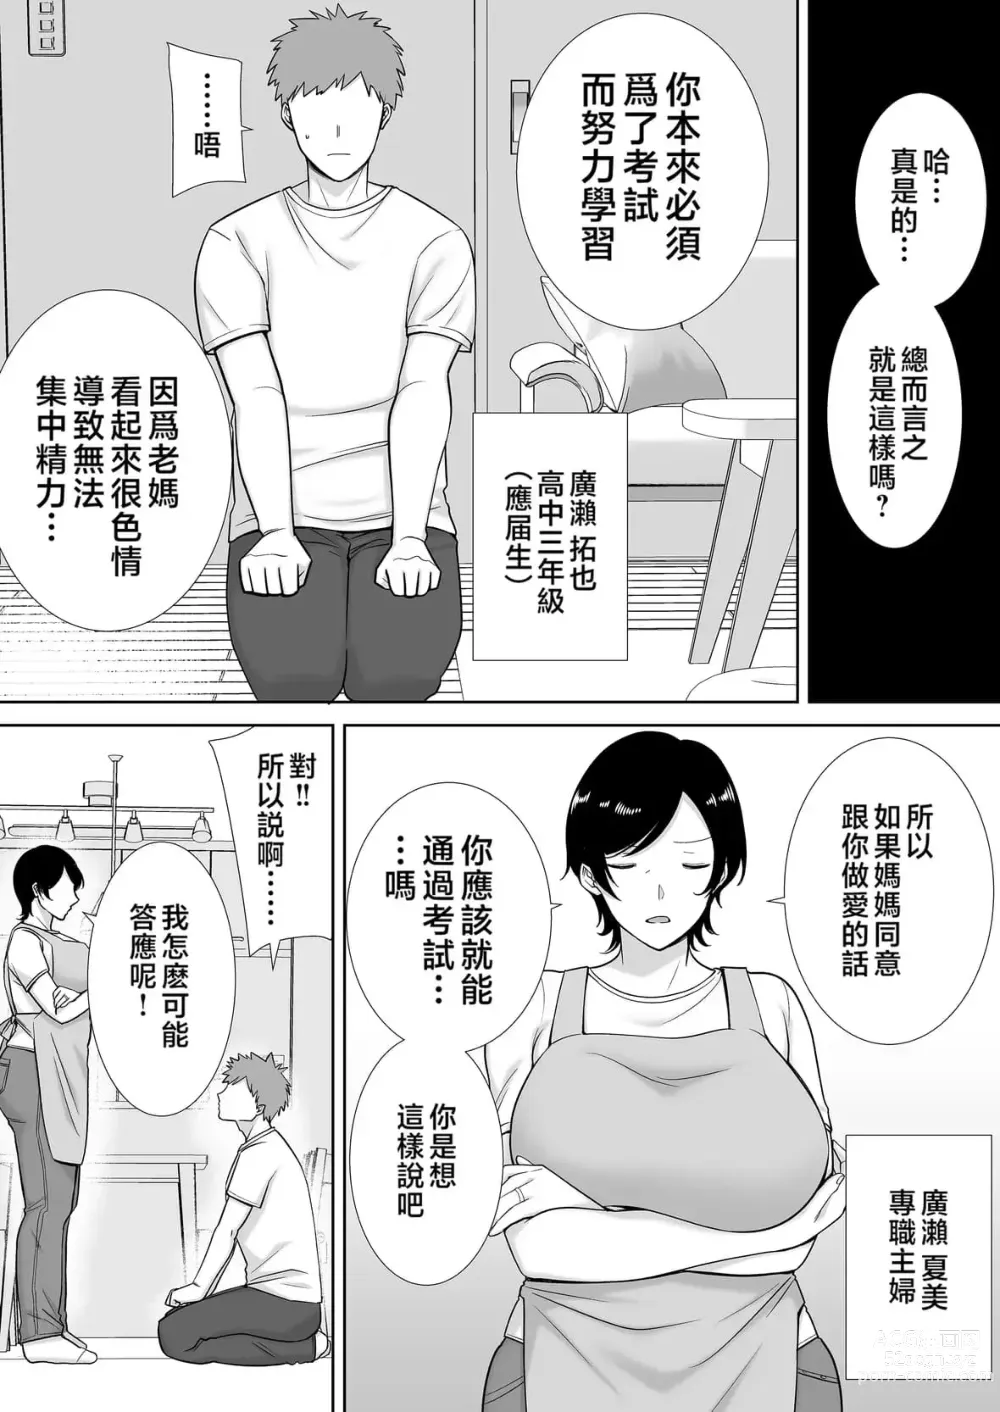 Page 3 of doujinshi even mom want a litle lovin